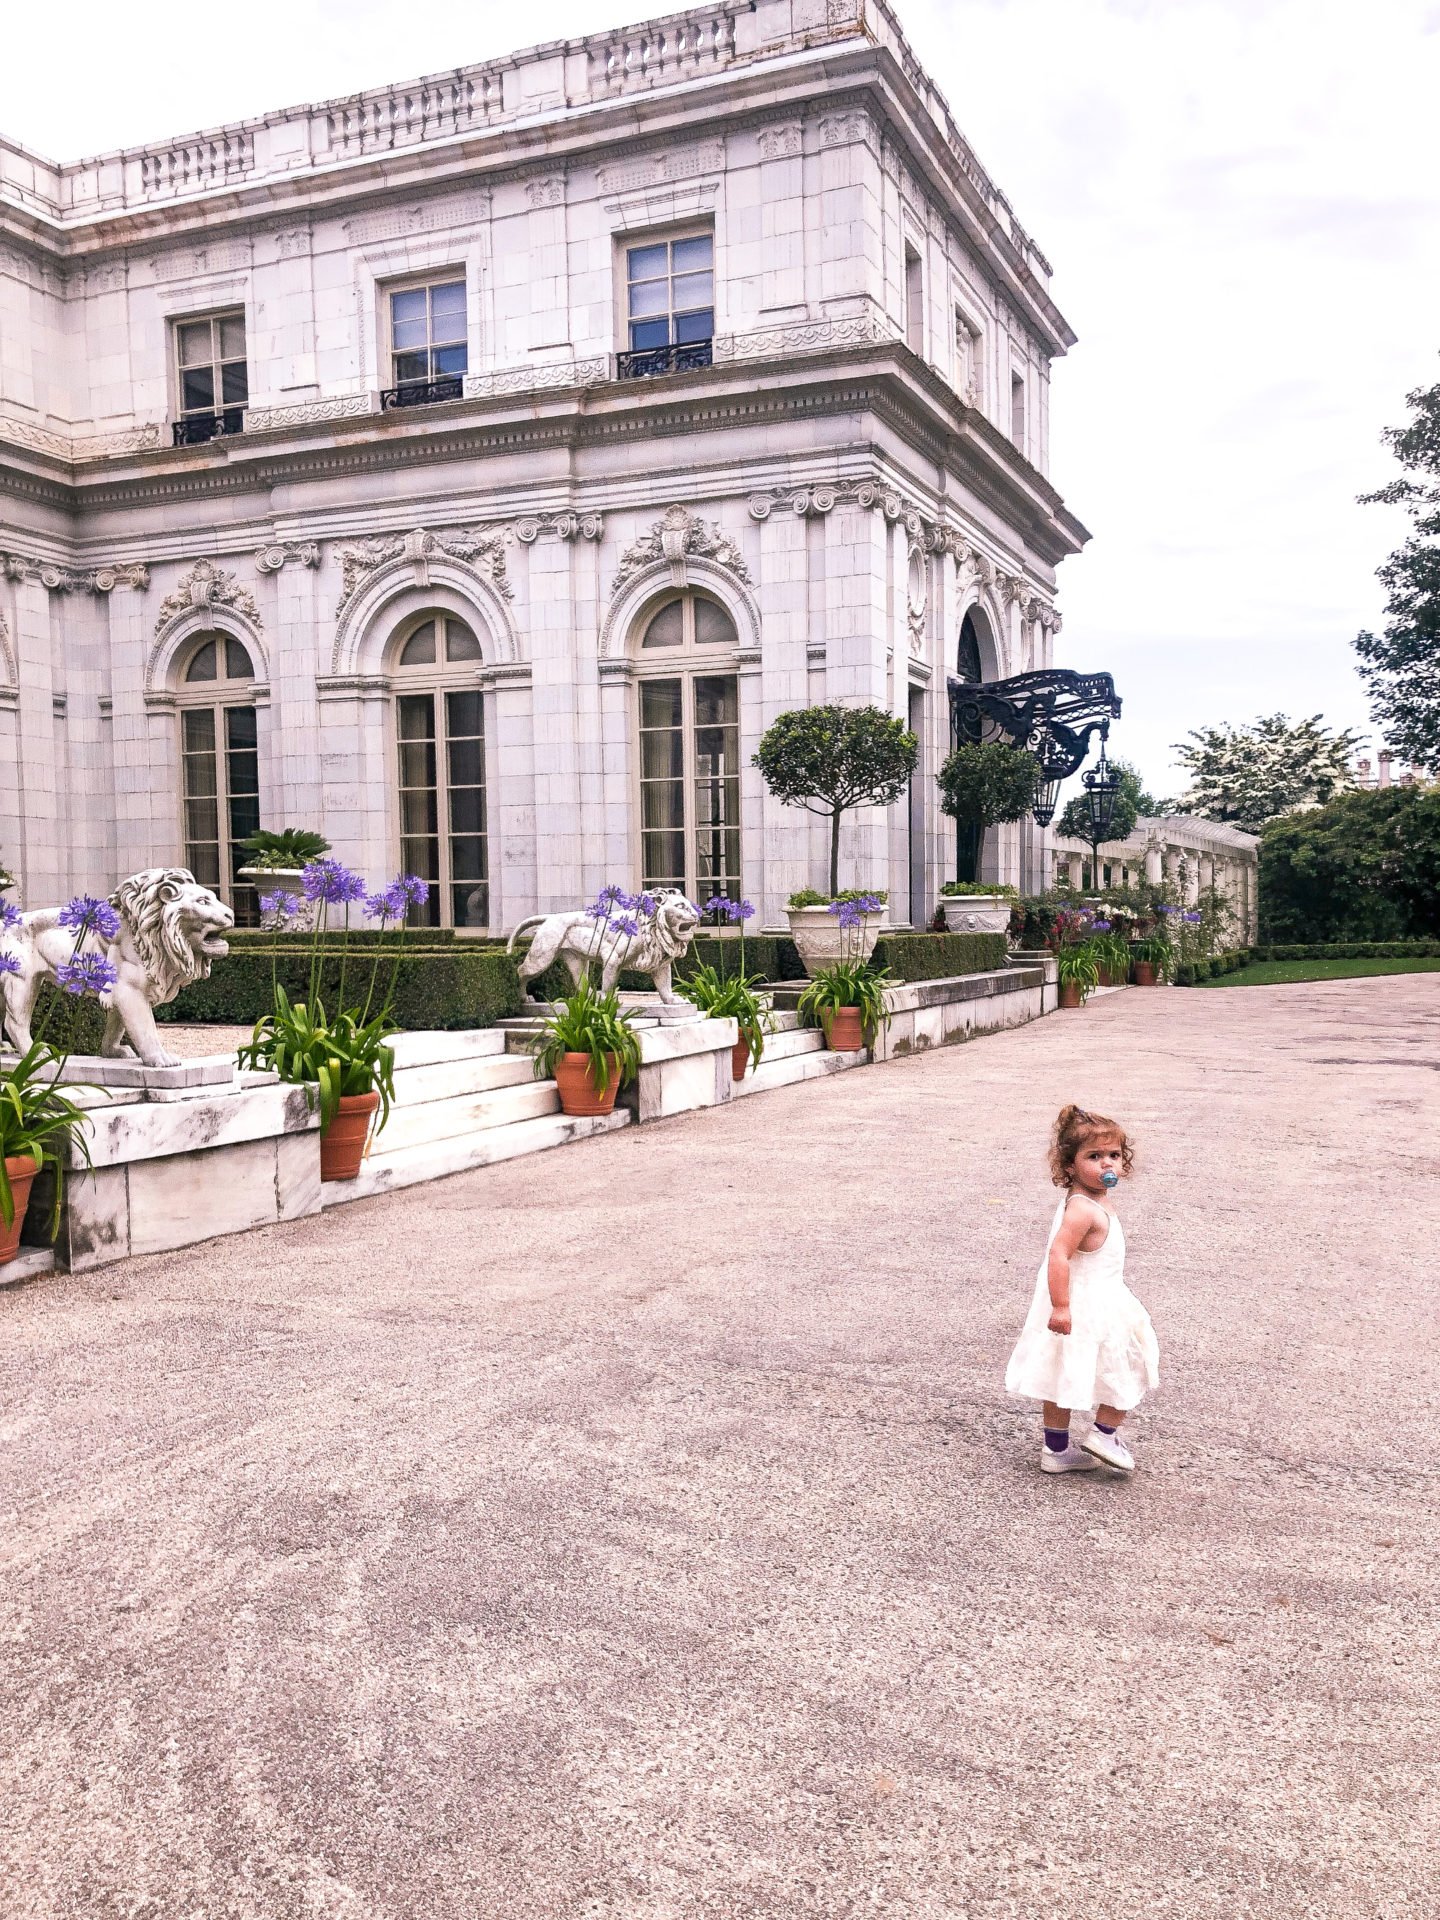 Lifestyle Blogger Chocolate & Lace shares her trip to Rose Cliff Mansion in Newport, Rhode Island. 